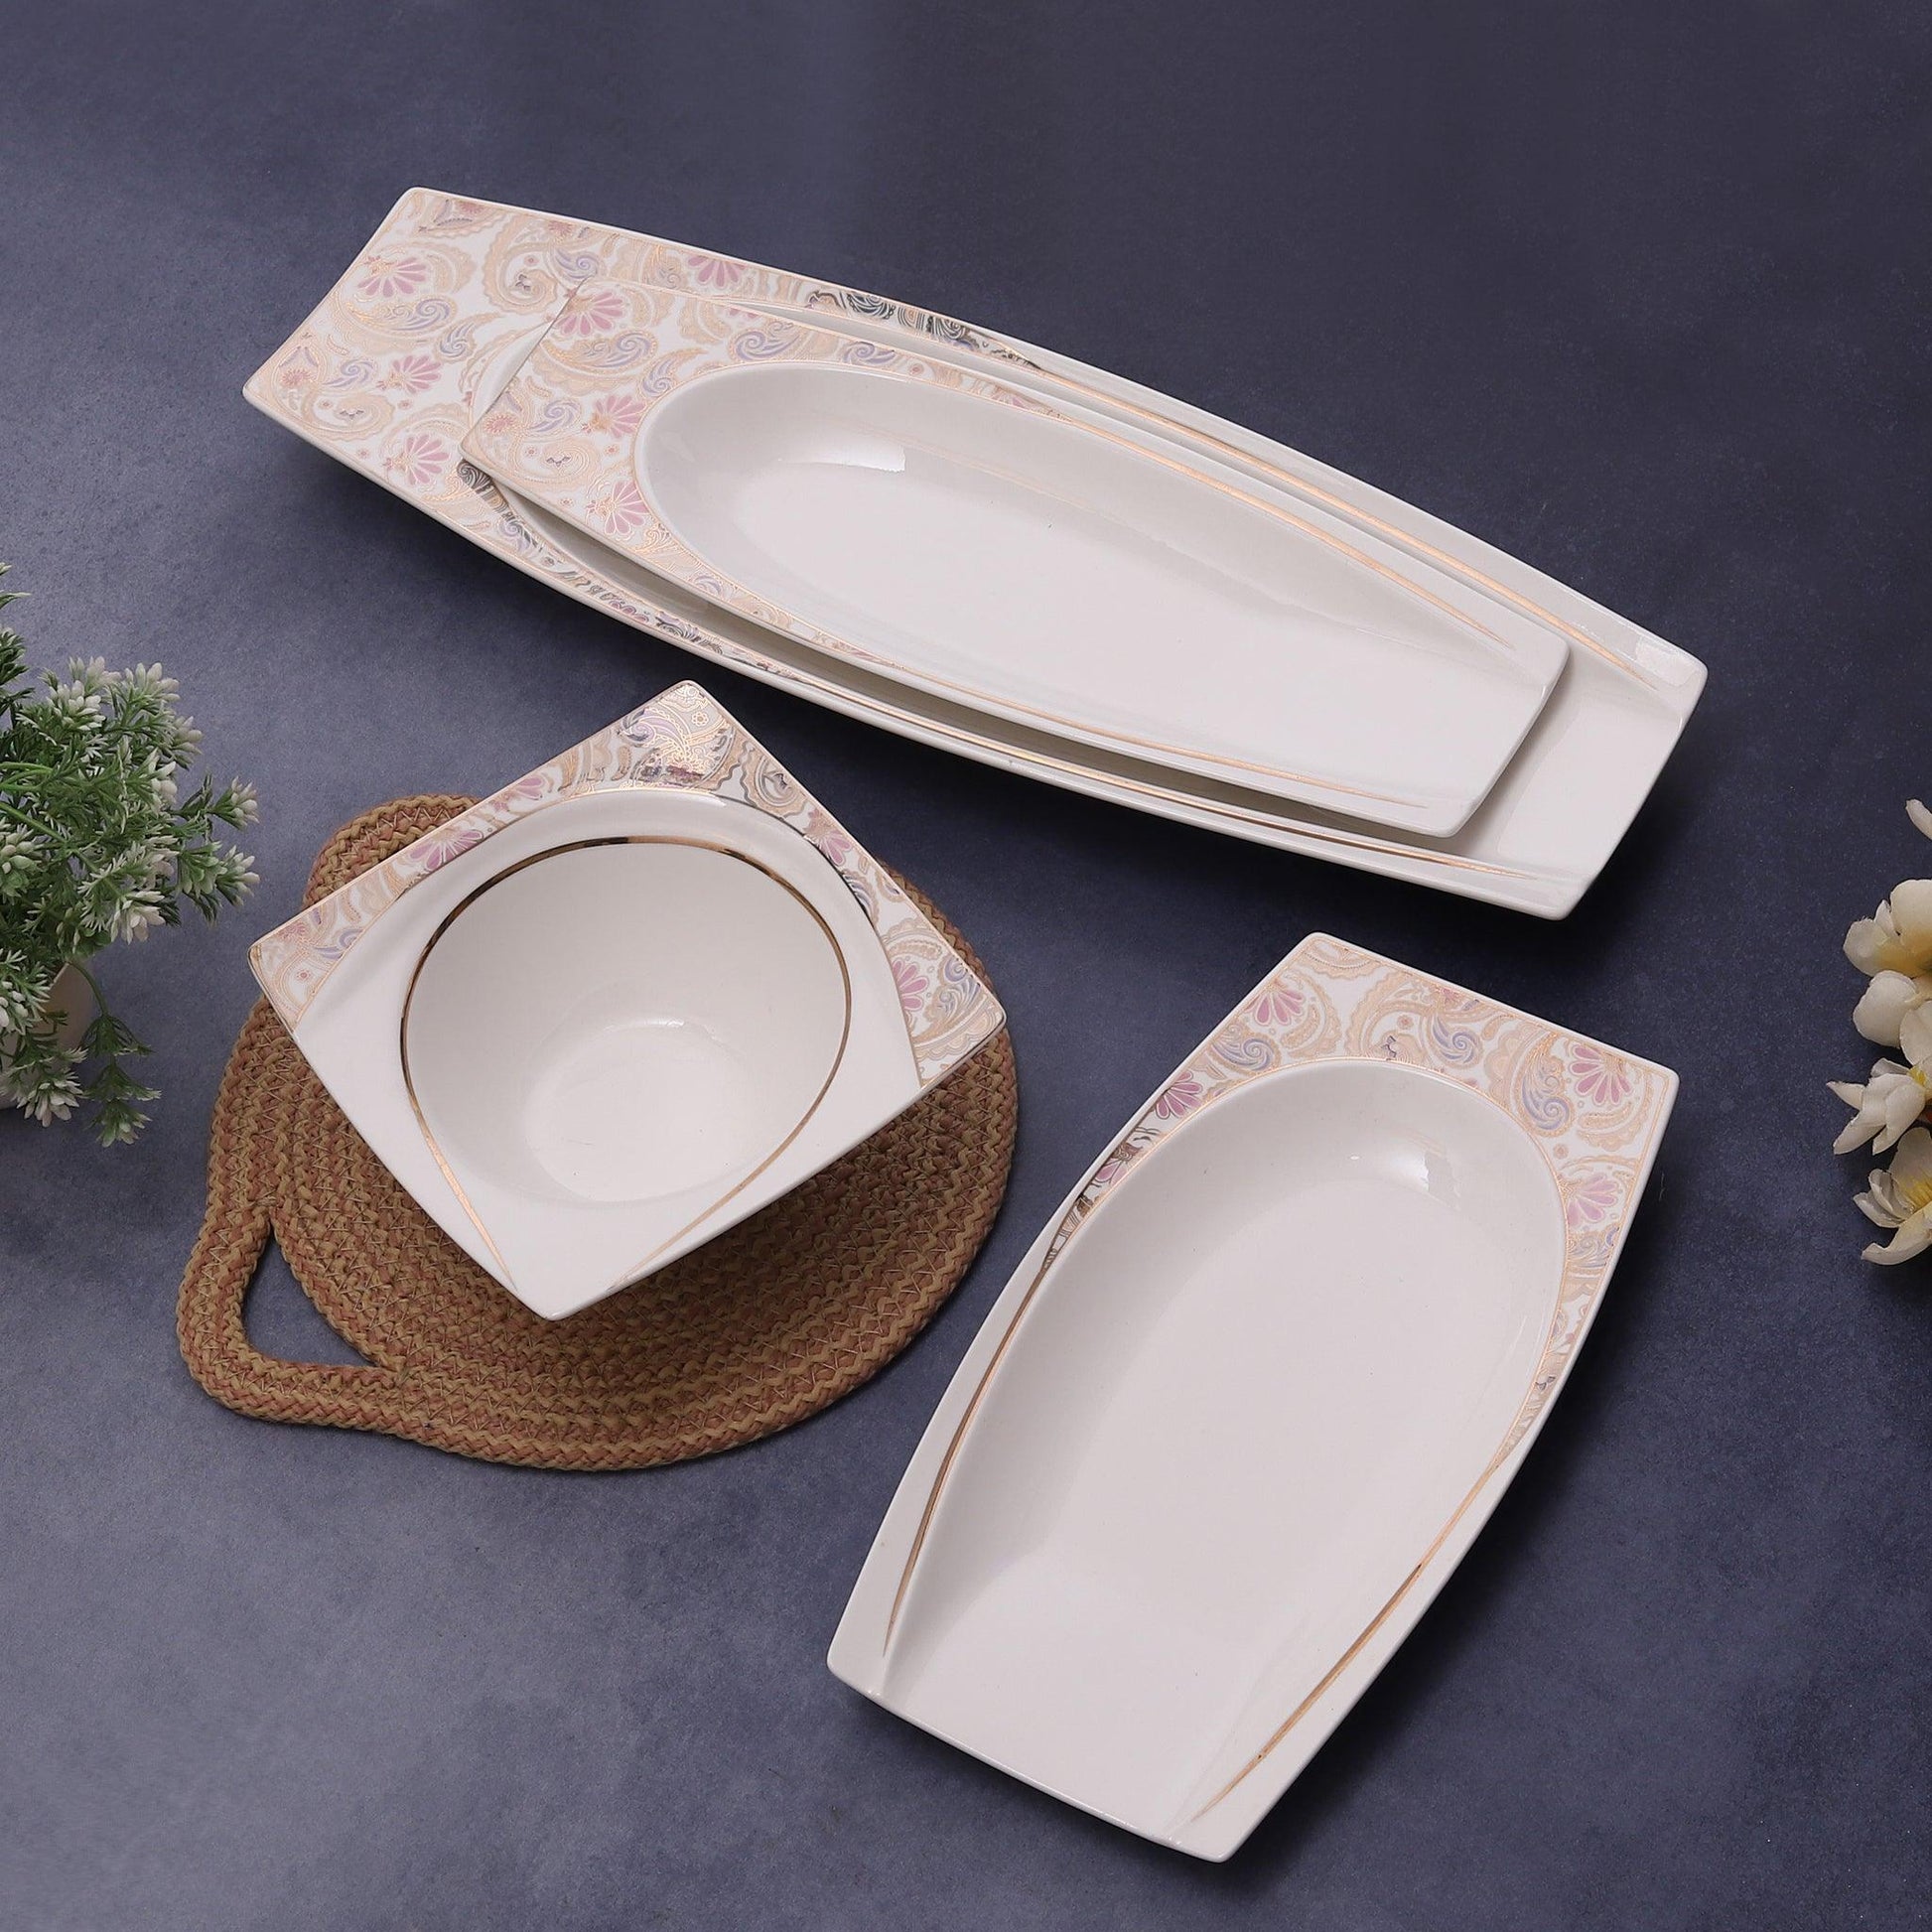 Snacks Serving Set with 2 Bowls and 3 Serving Trays - Amora Crockery